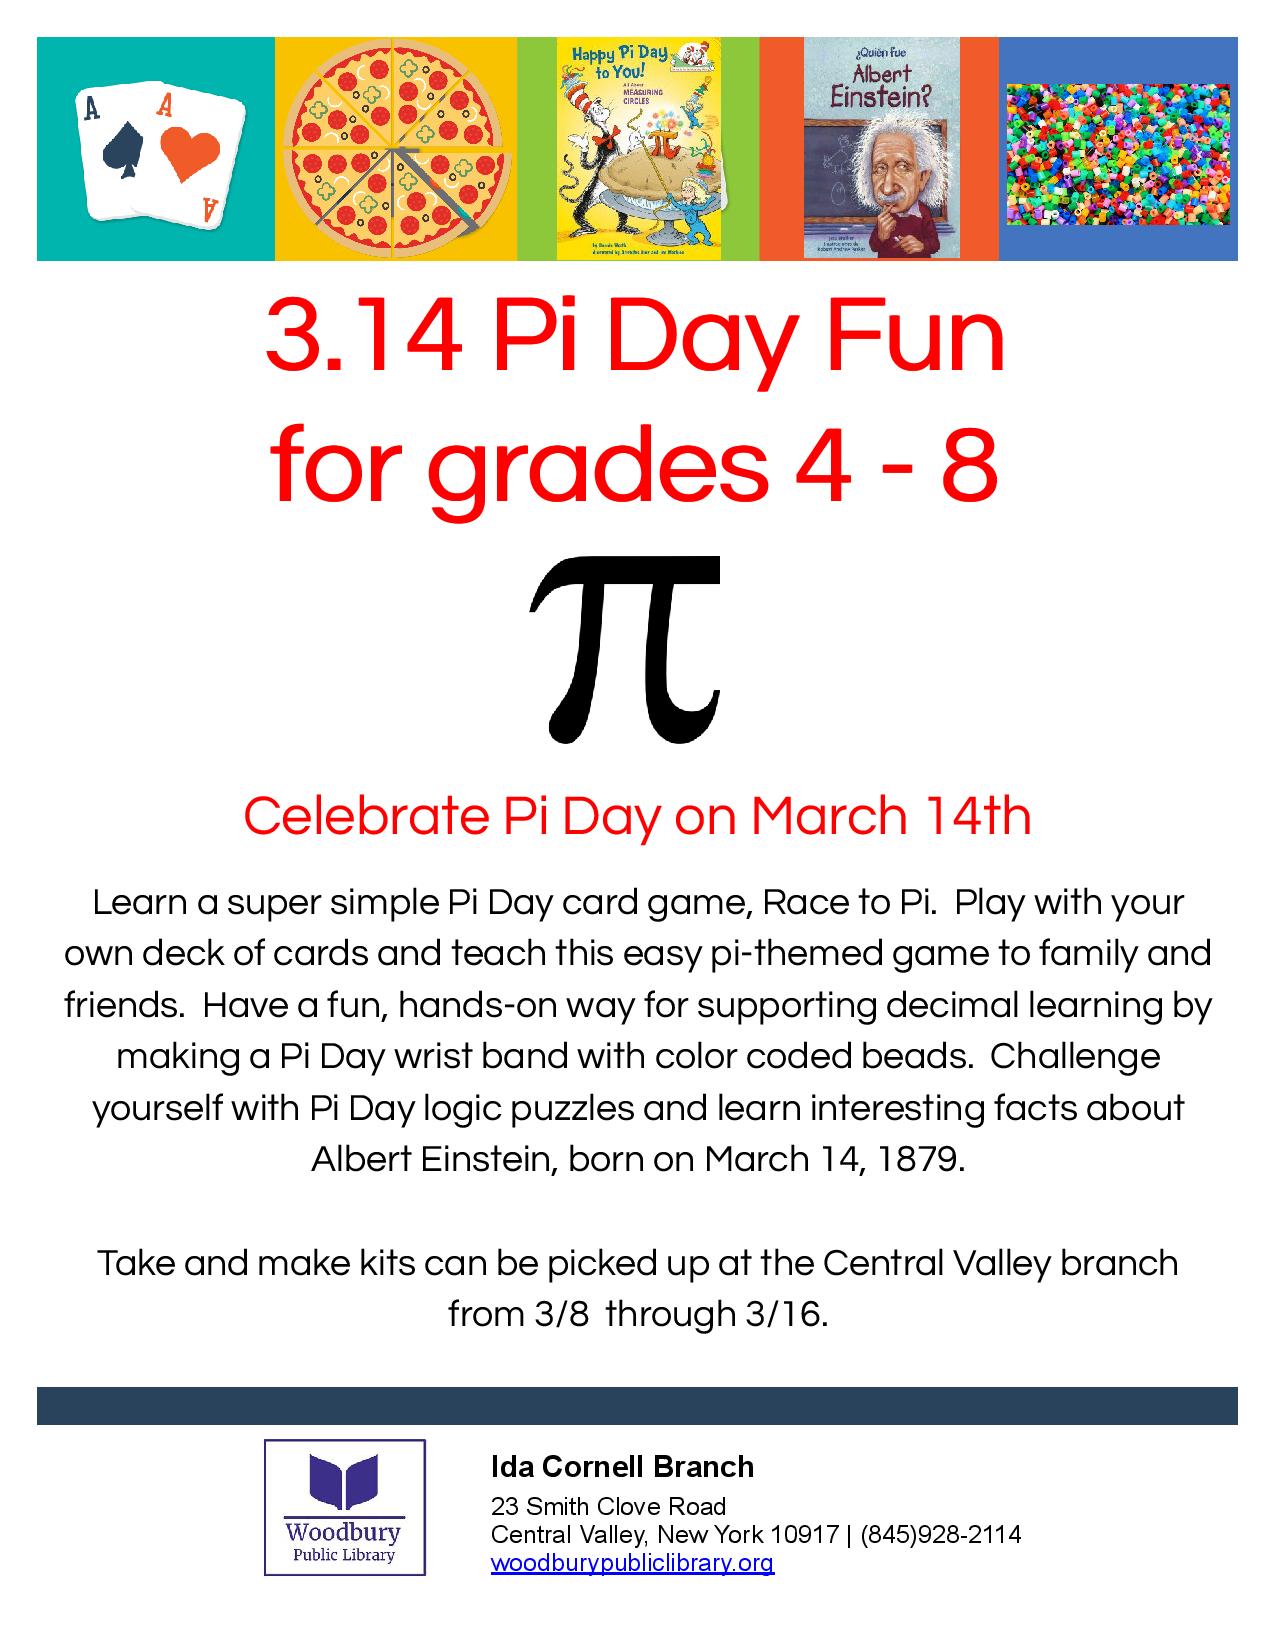 What Is 3 14 Pi Day